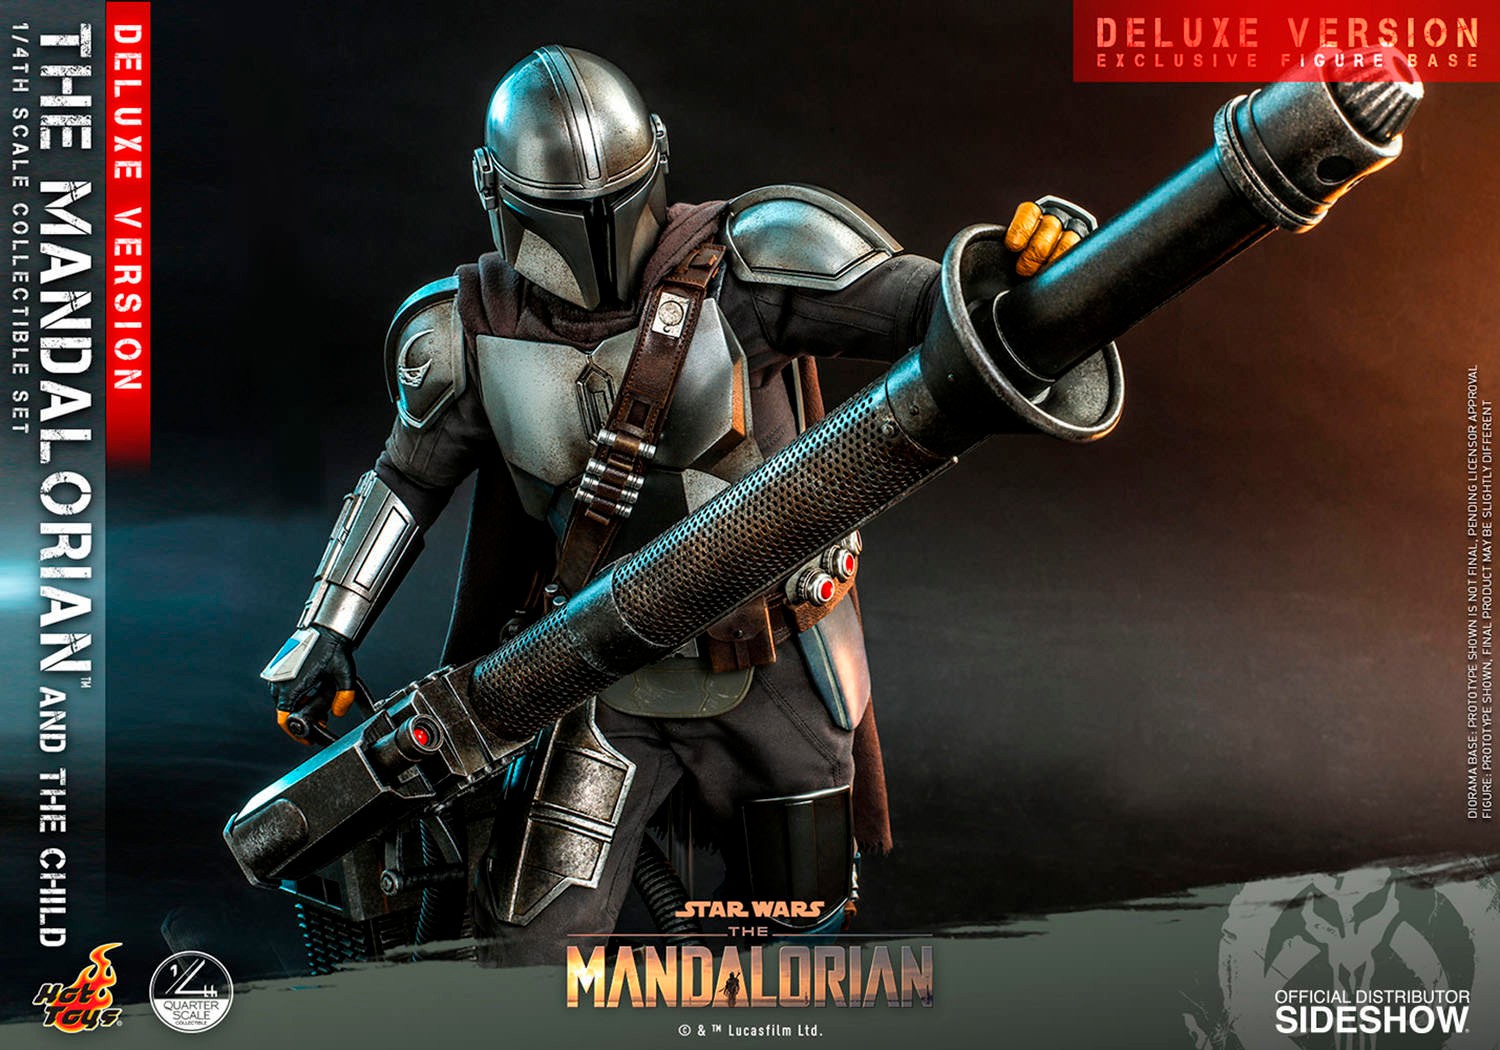 Disney Star Wars Mandalorian Deluxe 9 Figurine Play Set Collectable !!!